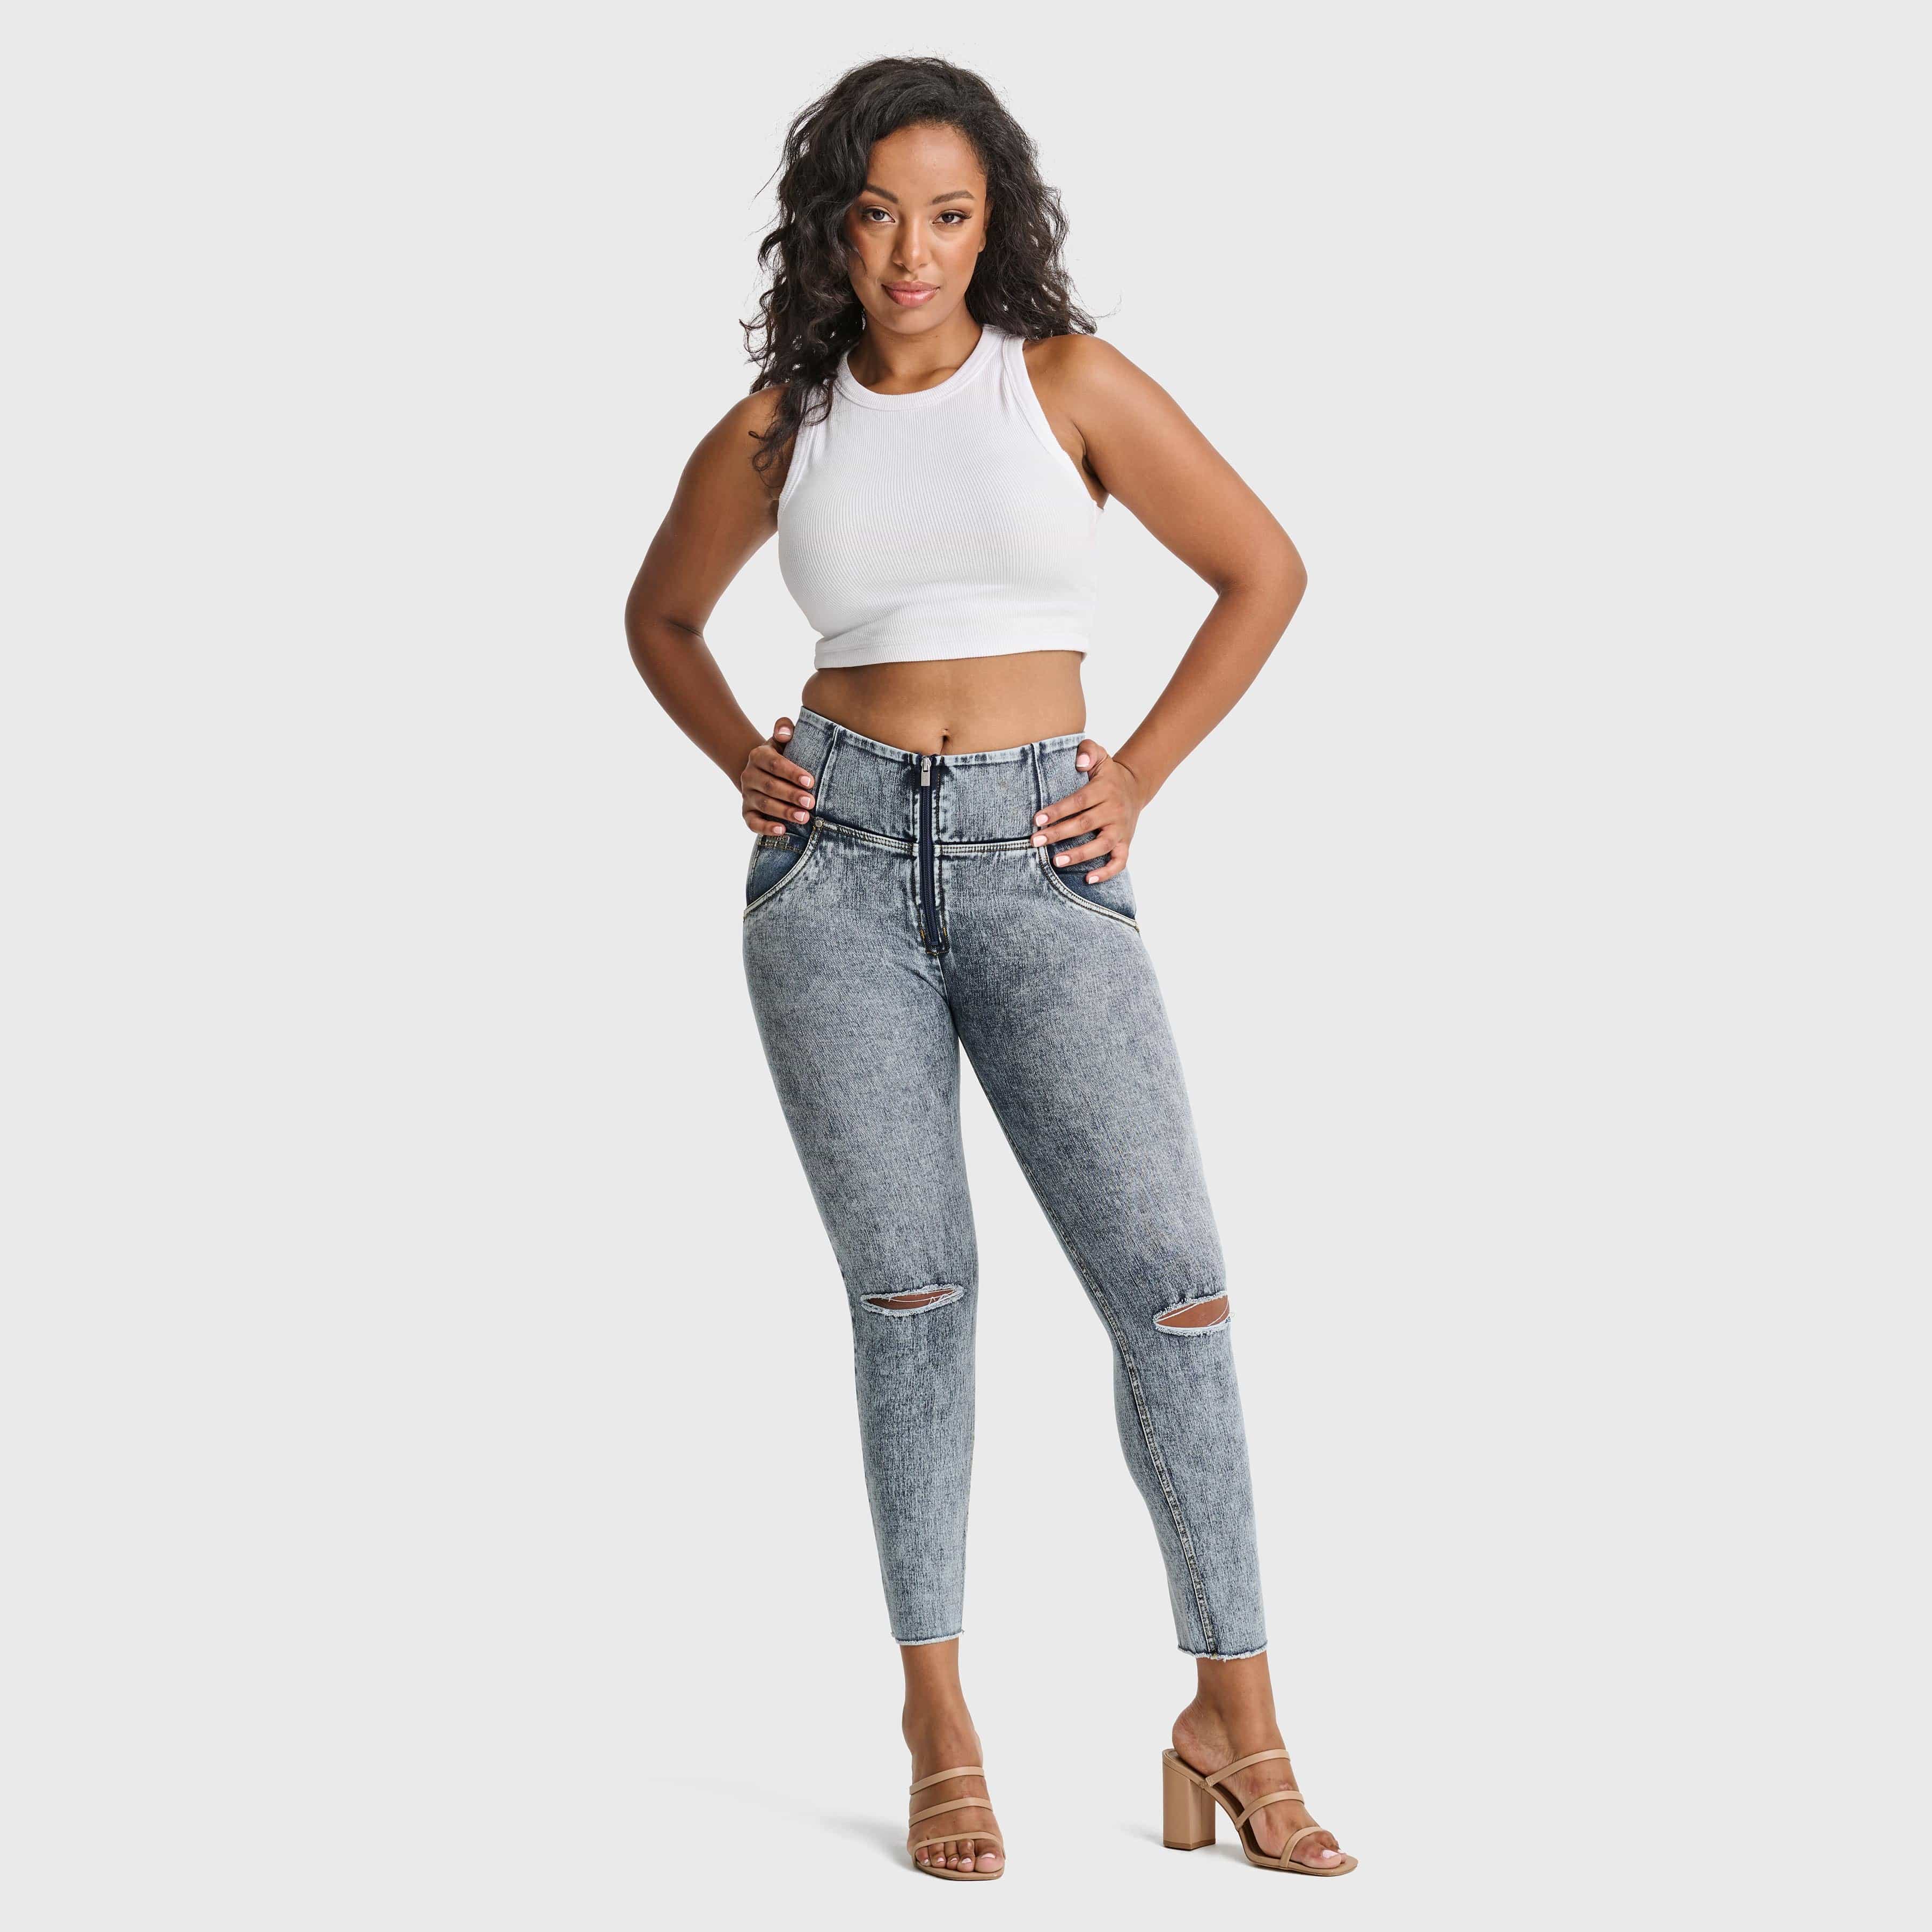 WR.UP® Snug Ripped Jeans - High Waisted - 7/8 Length - Blue Stonewash + Yellow Stitching 2